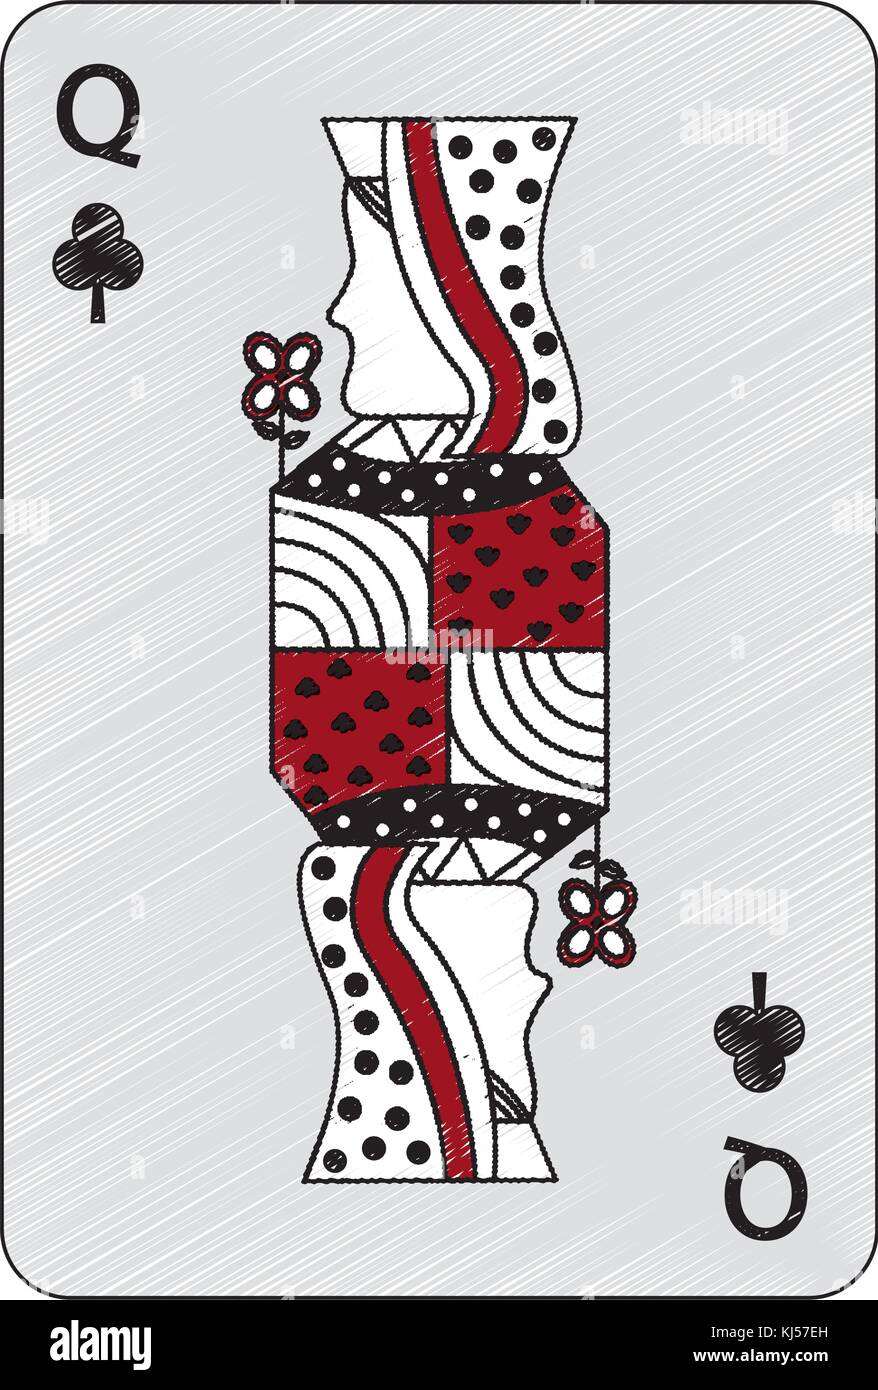 queen of clover or clubs french playing cards related icon image Stock ...